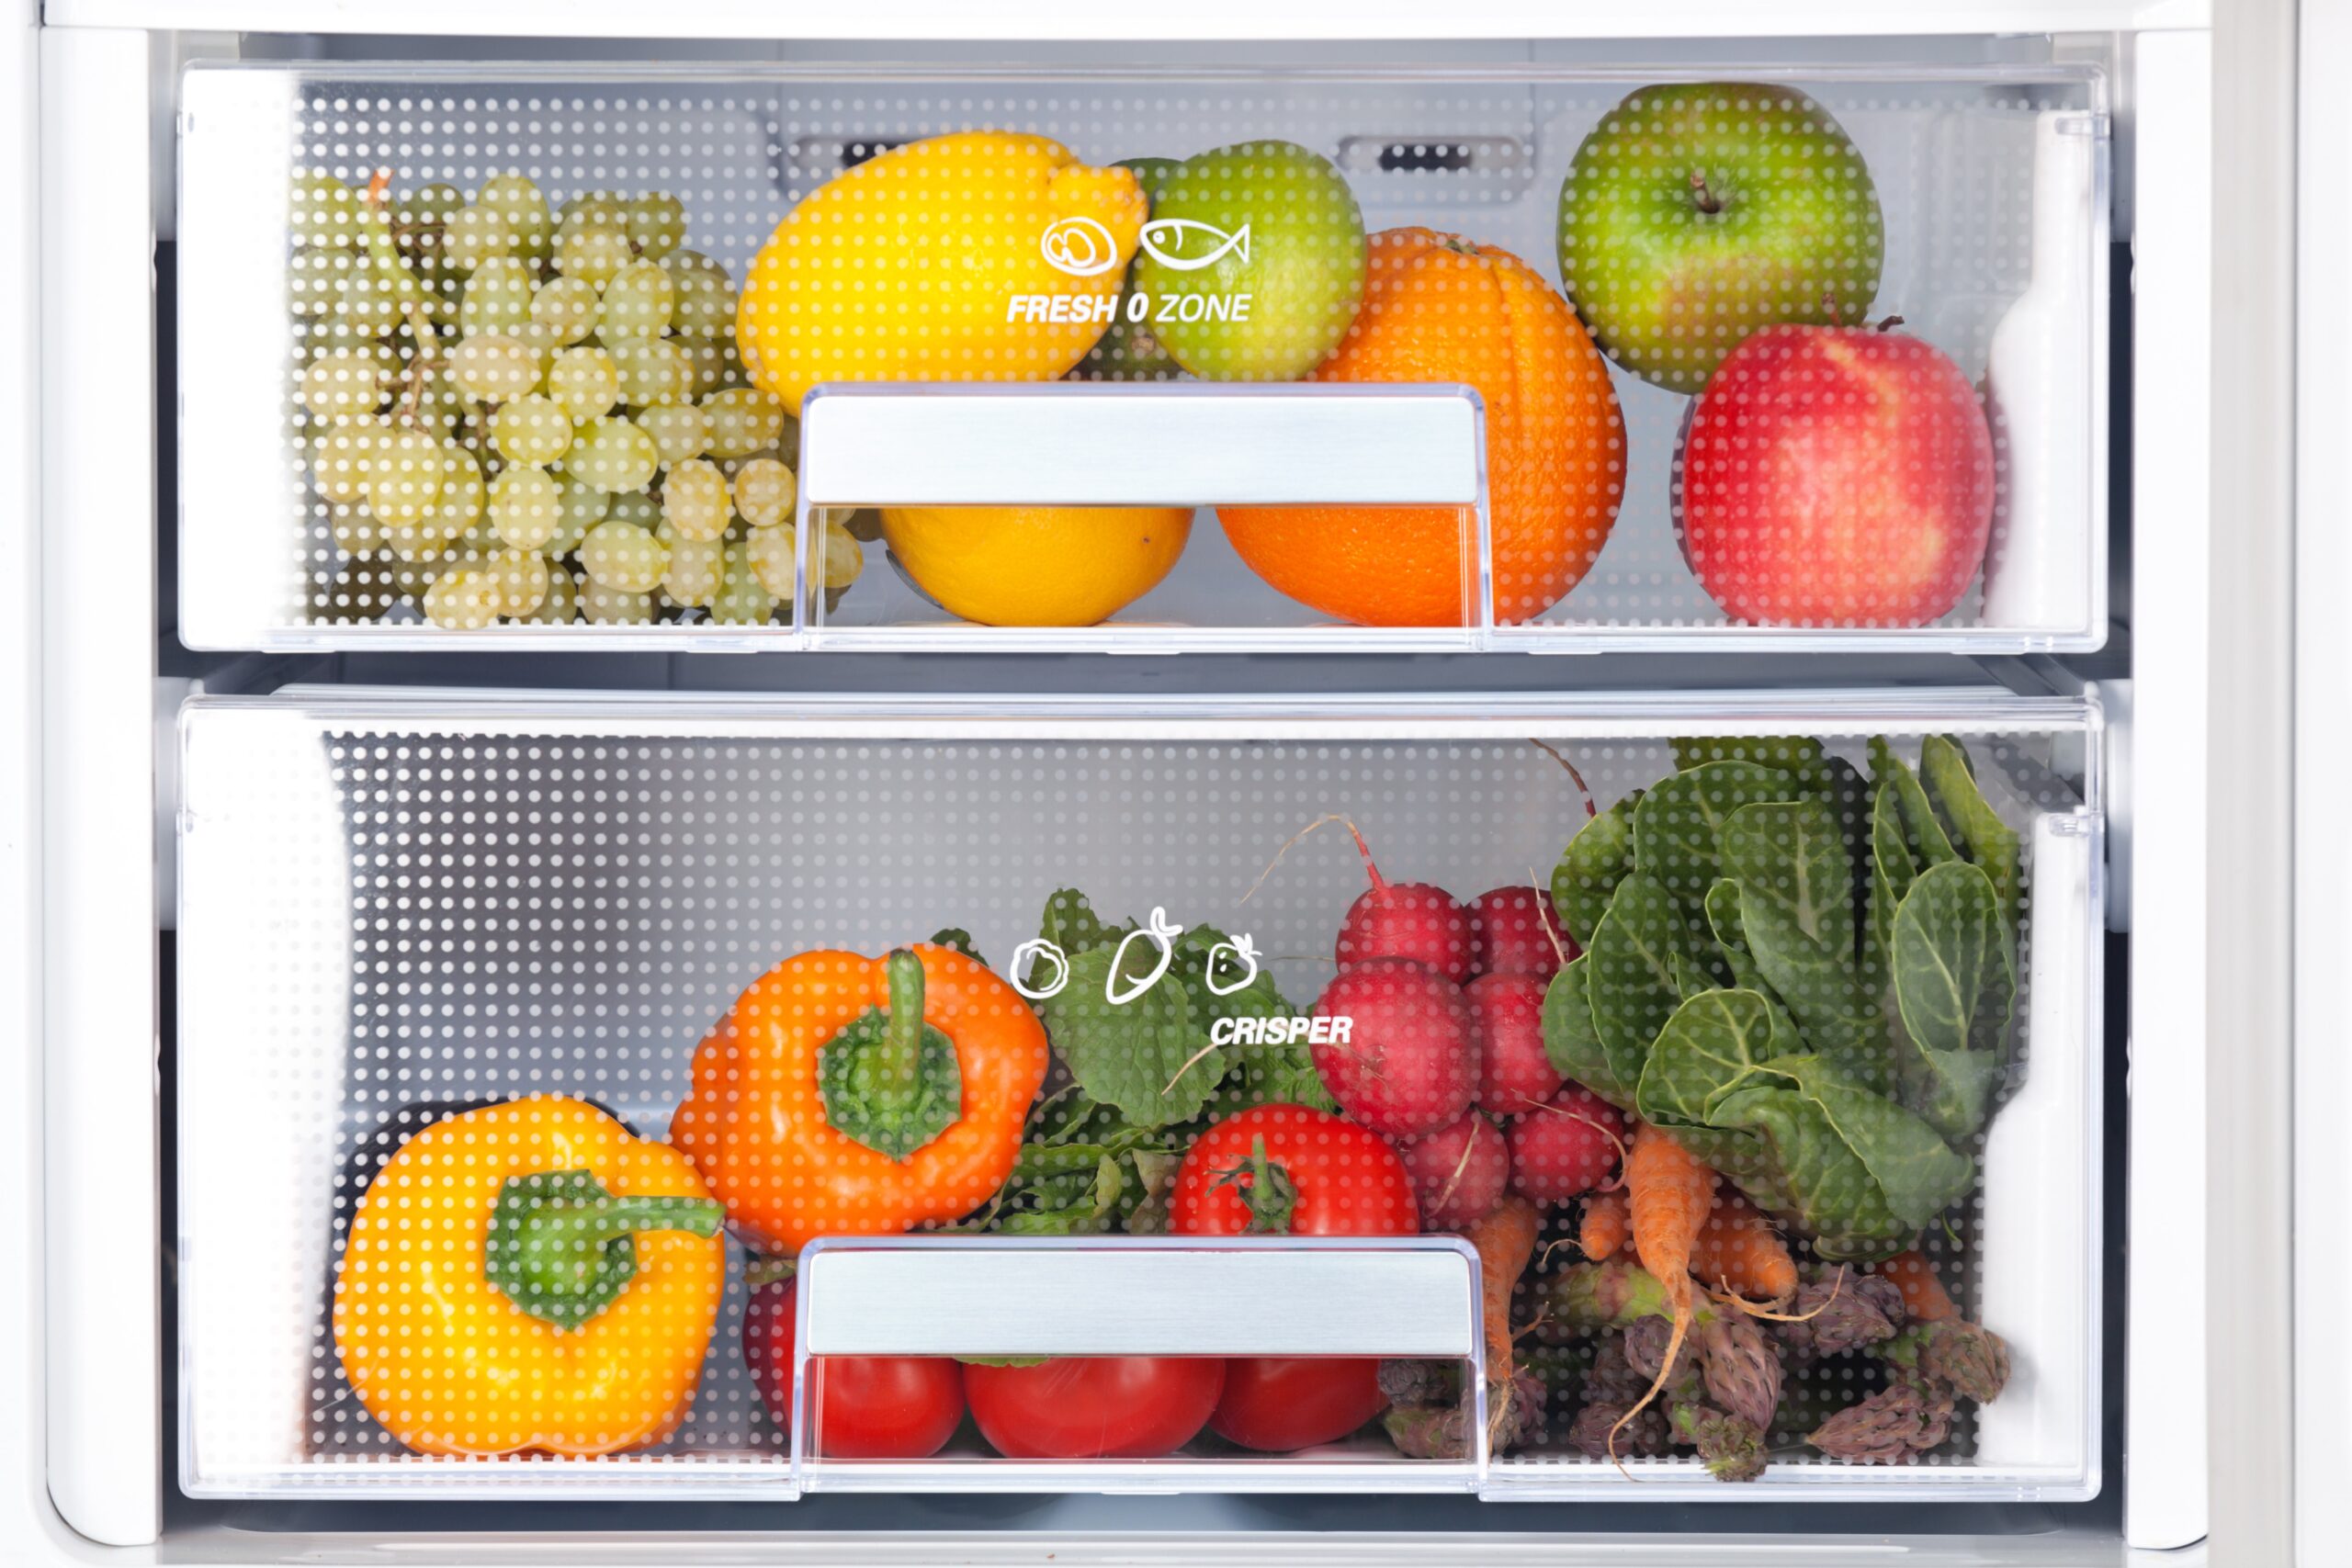 What Does Your Crisper Drawer Do?